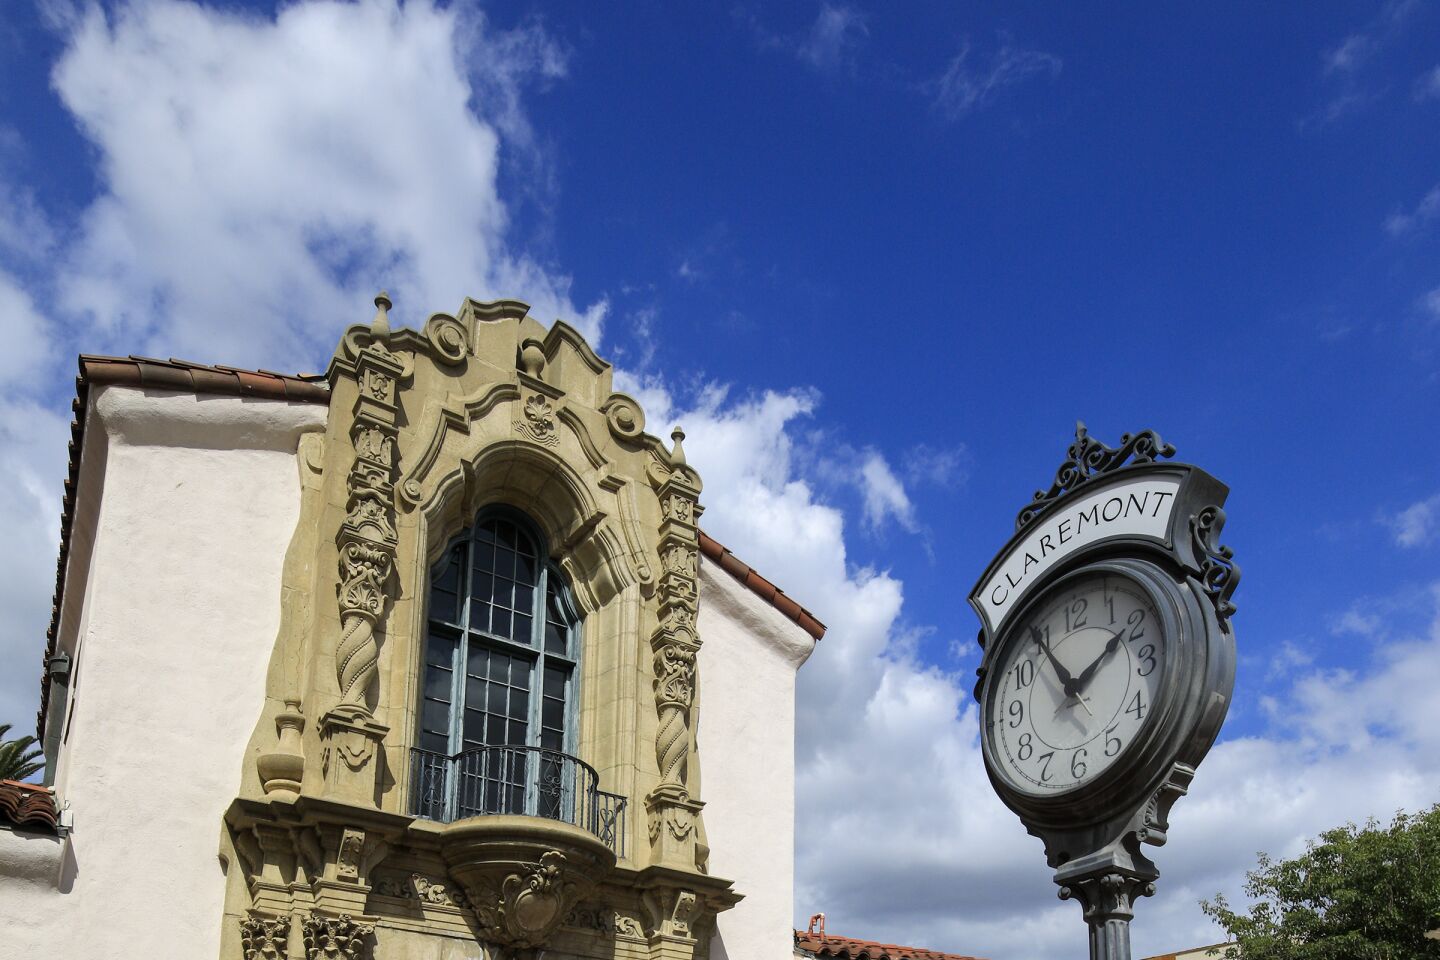 The Claremont Museum of Art is housed in the Claremont Depot, where a trackside clock keeps passengers on time for departures in the Claremont Village.